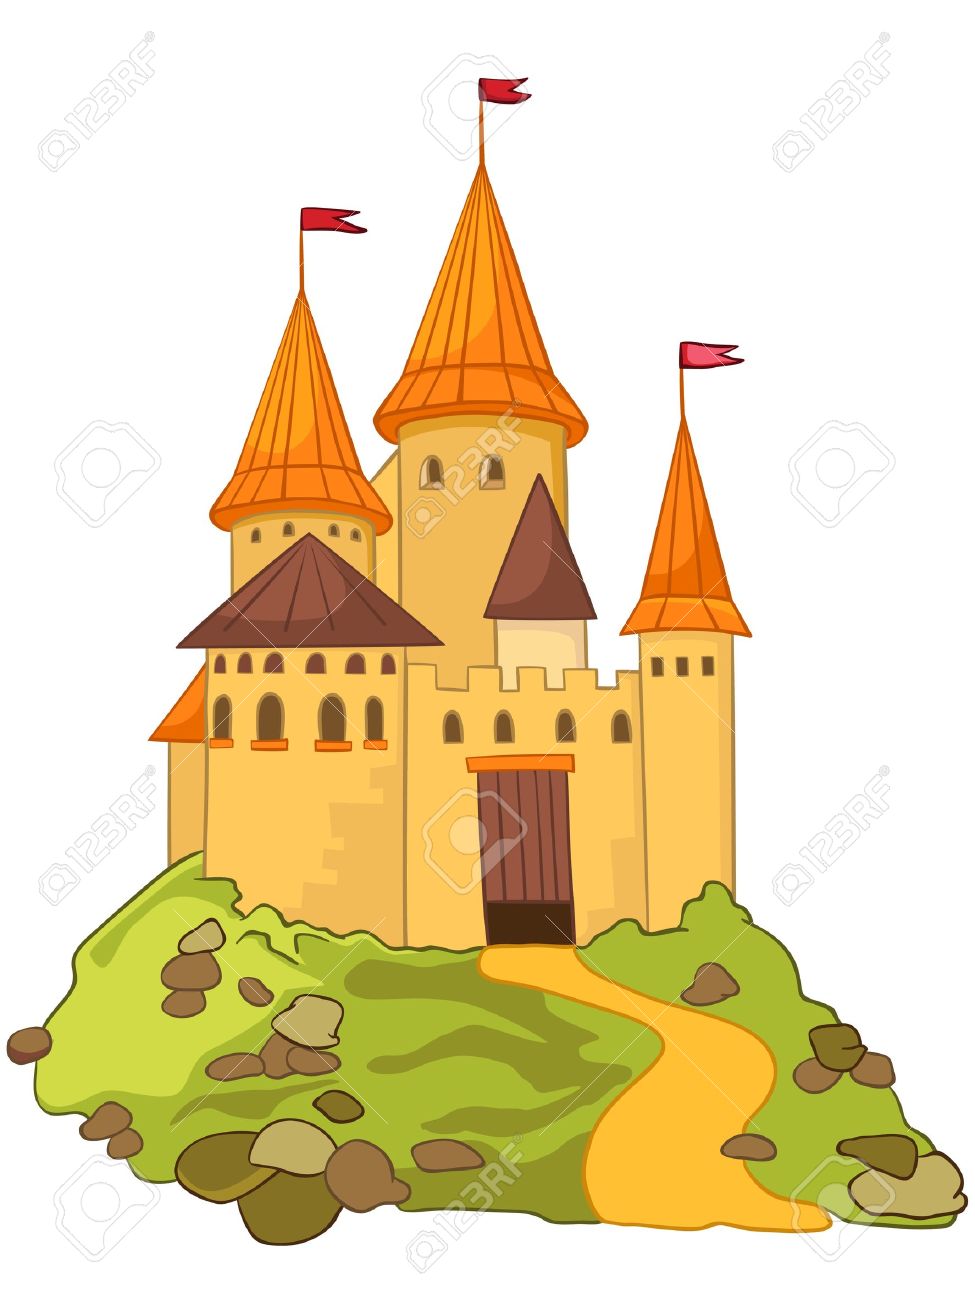 Great palace clipart - Clipground